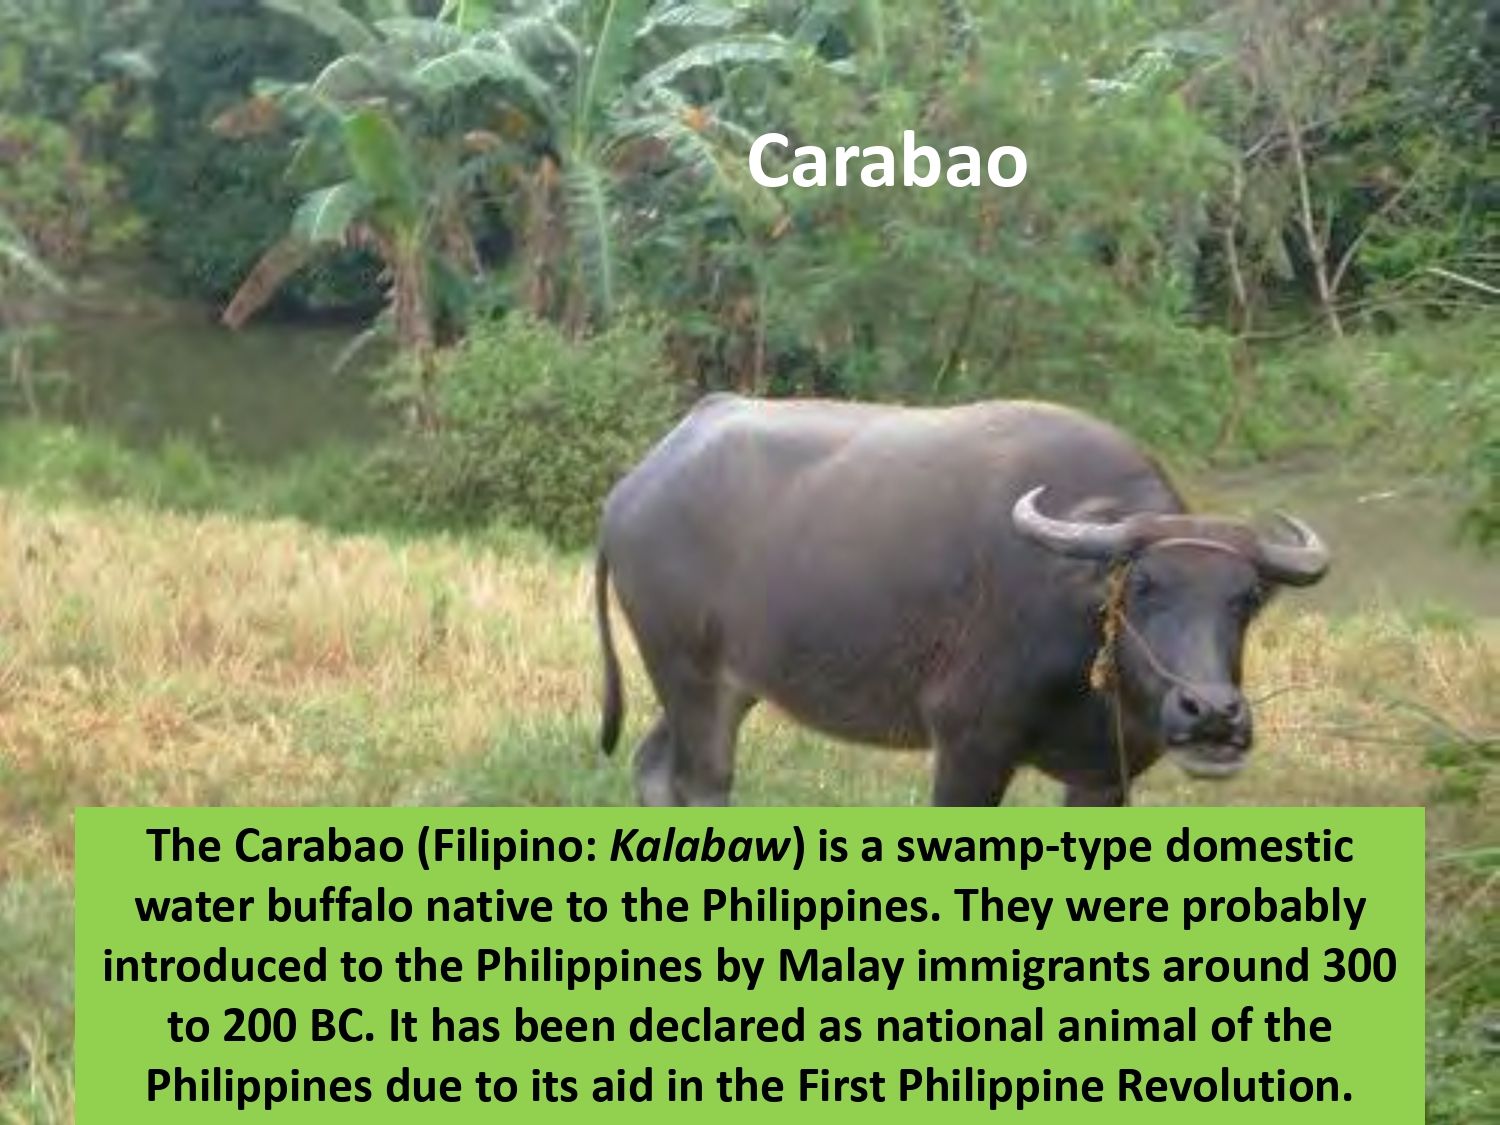 The Carabao (Filipino: Kalabaw) is a swamp-type domestic water buffalo native to the Philippines. They were probably introduced to the Philippines by Malay immigrants around 300 to 200 BC. It has been declared as national animal of the Philippines due to its aid in the First Philippine Revolution.